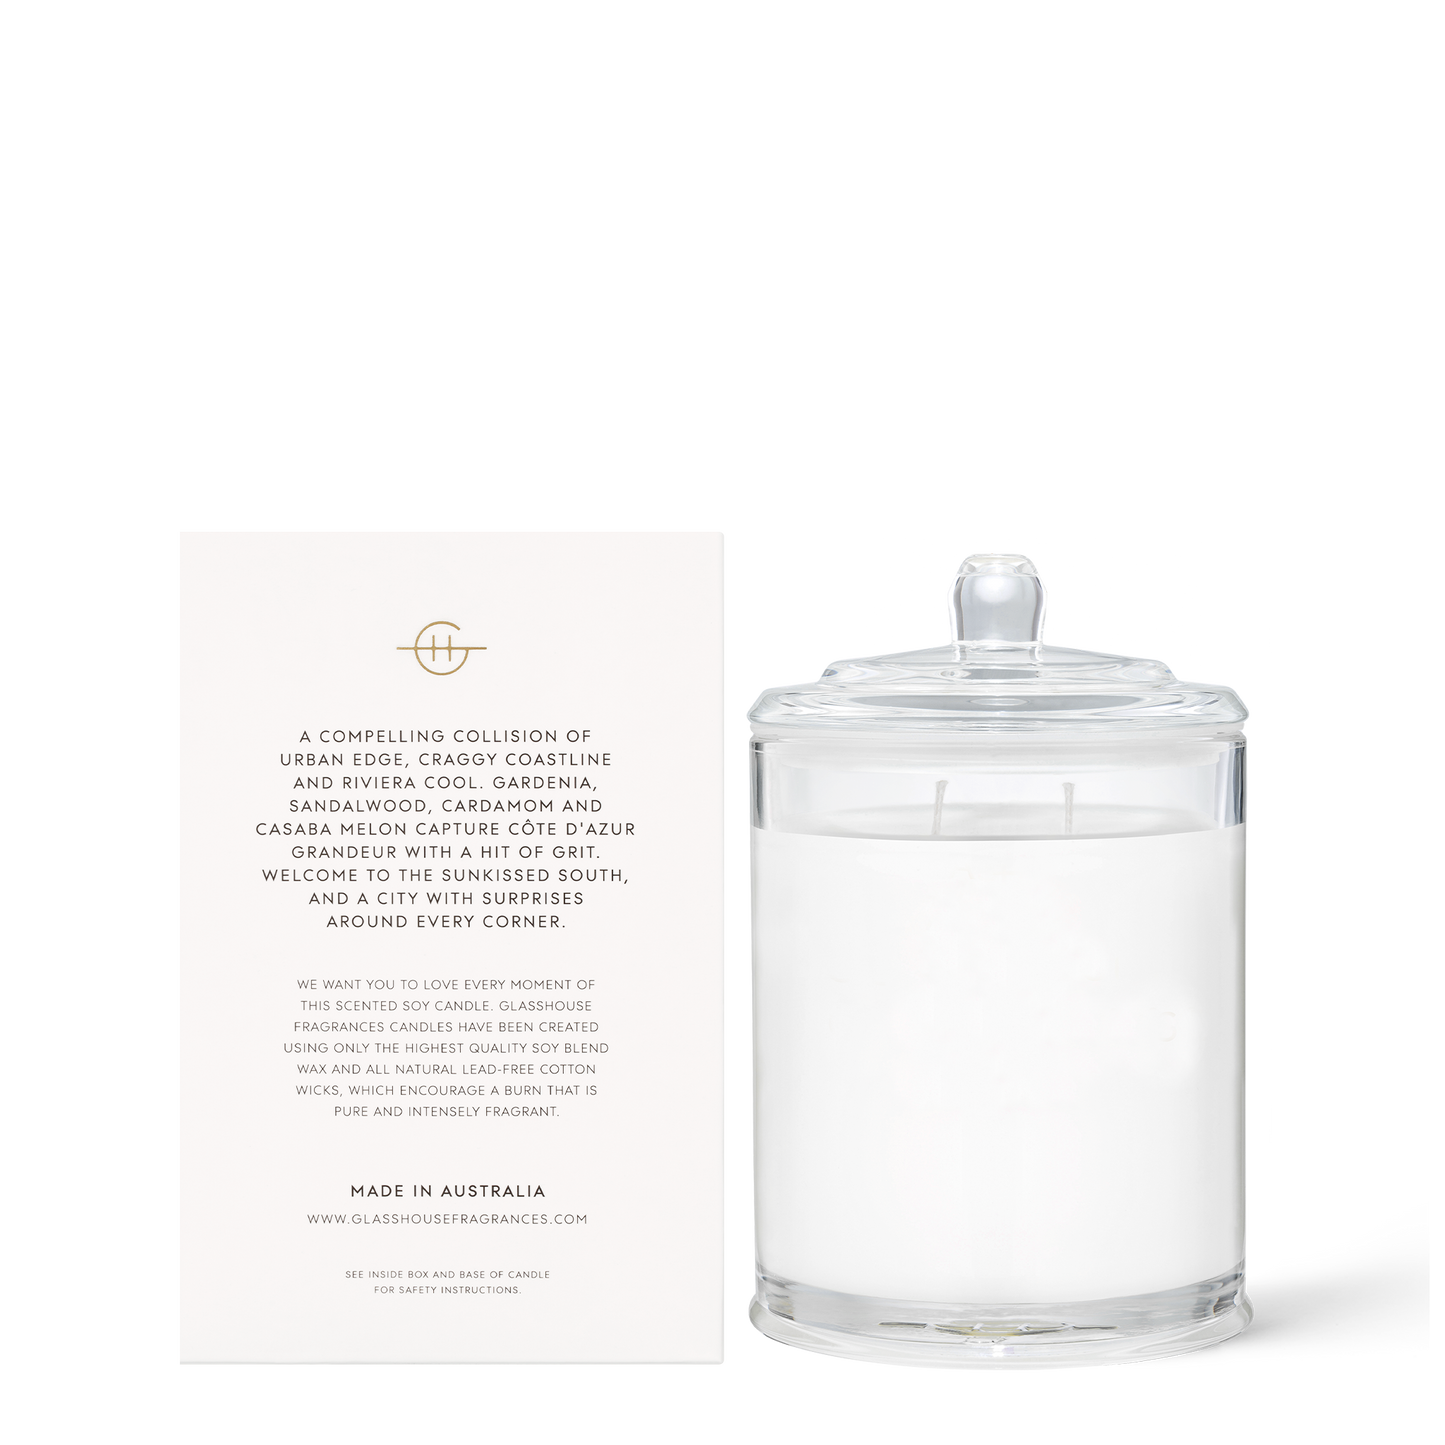 13.4oz Marseille Memoir - Triple Scented Soy Candle